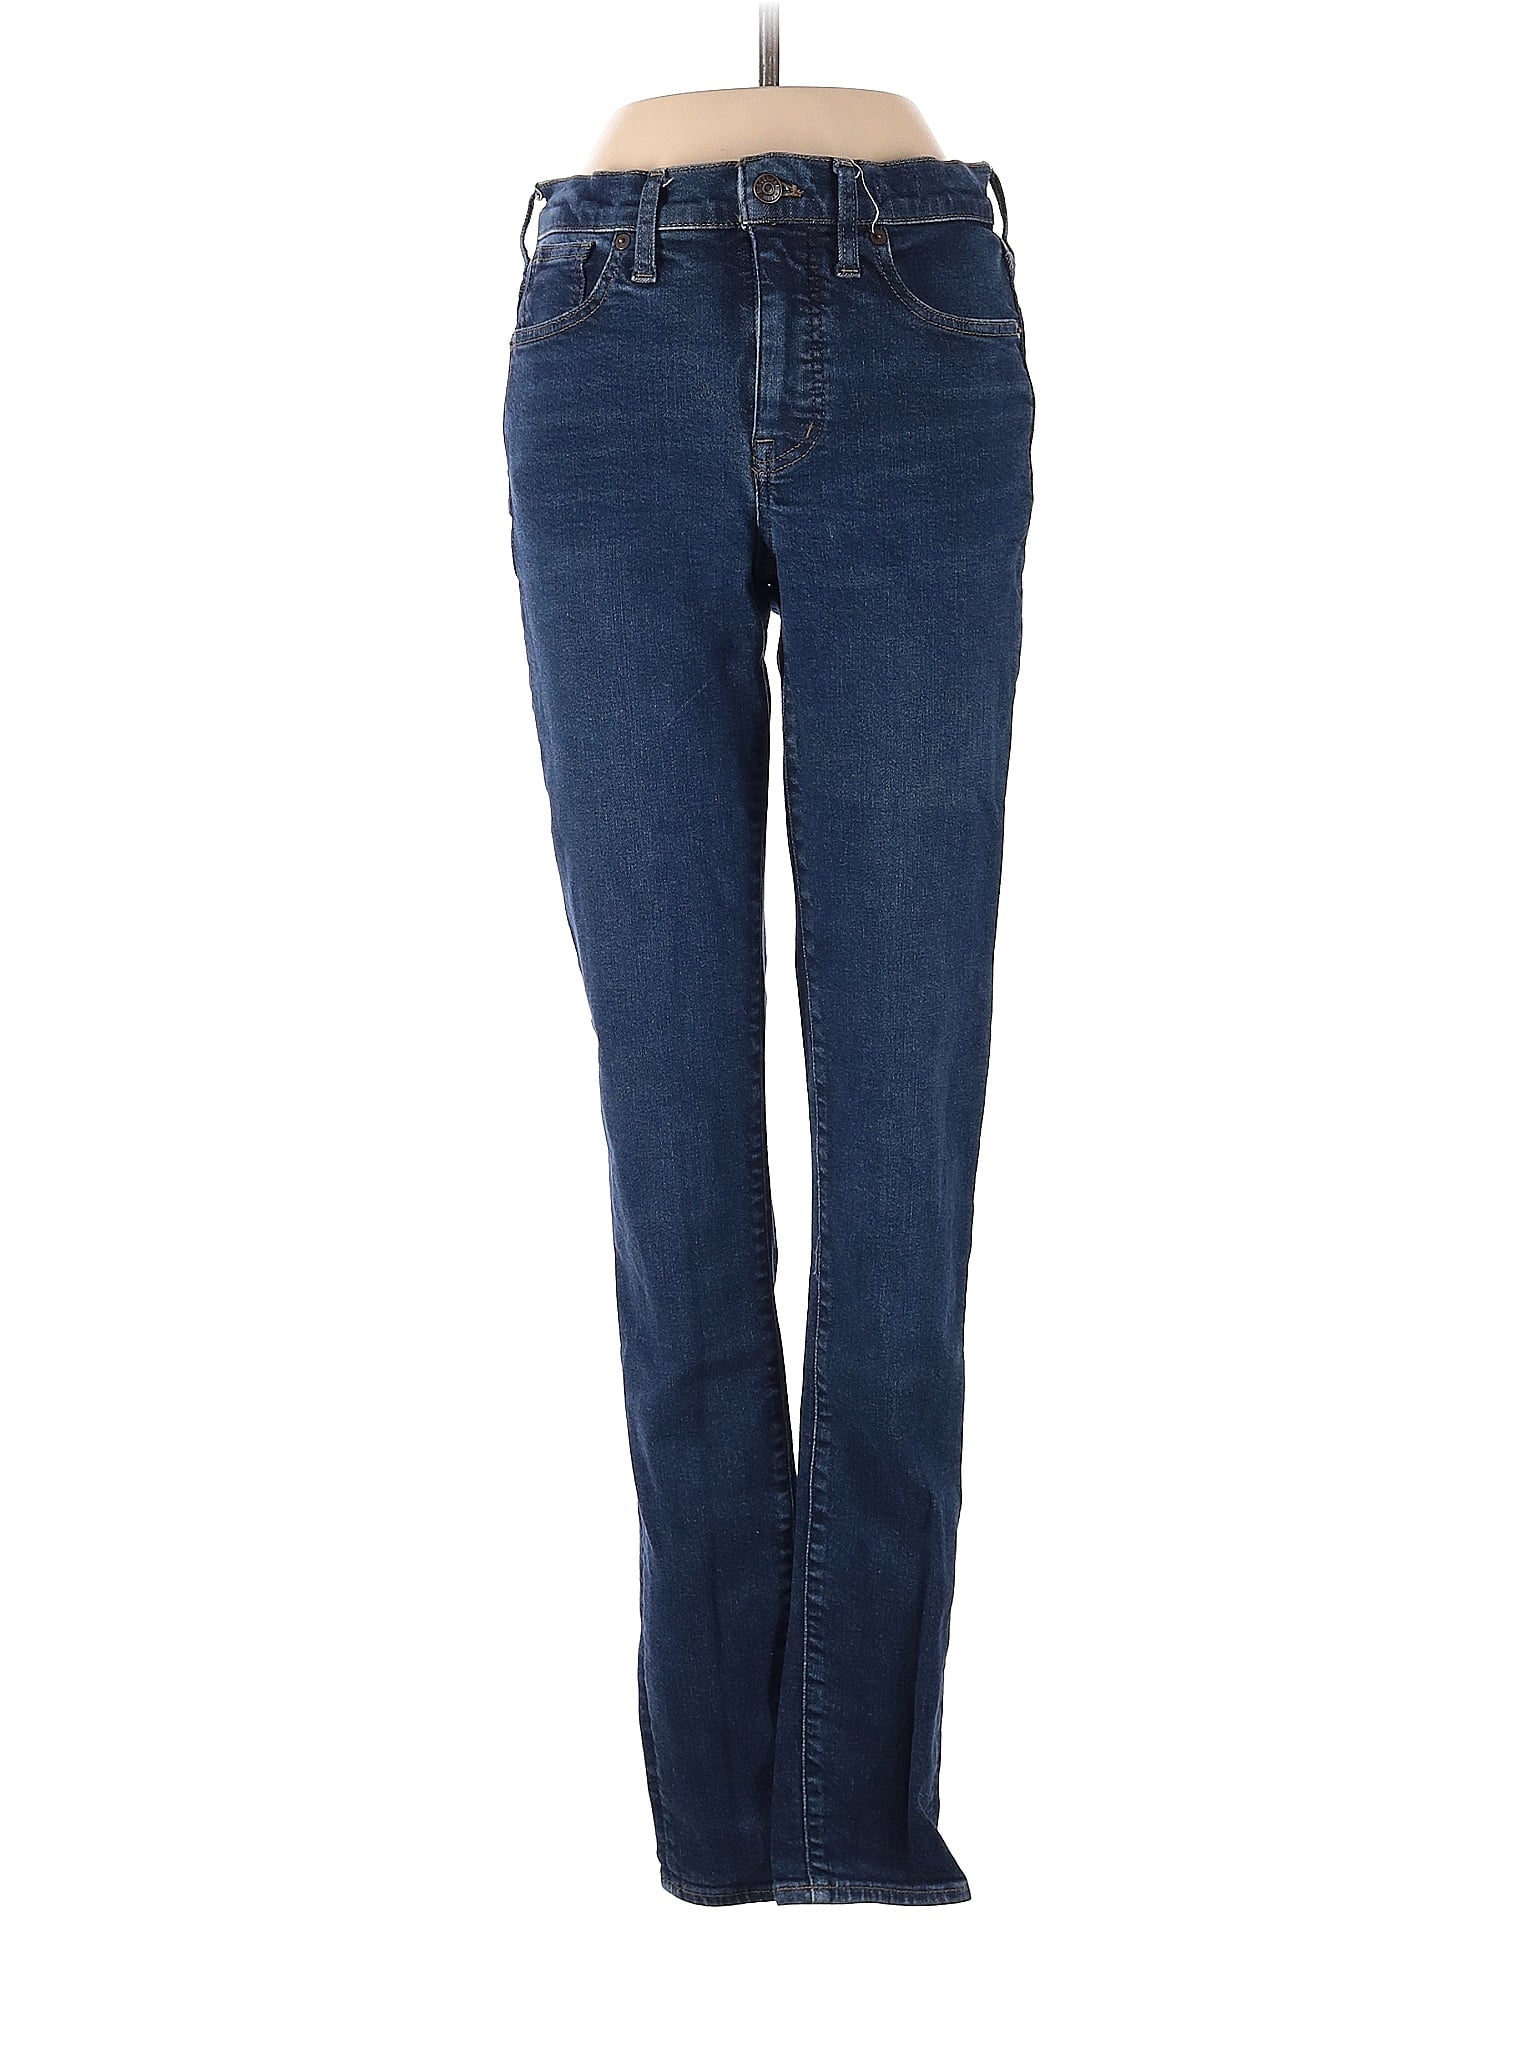 High-Rise Boyjeans Taller 9" Mid-Rise Skinny Jeans In Orland Wash: TENCEL&trade; Denim Edition in Dark Wash waist size - 27 T